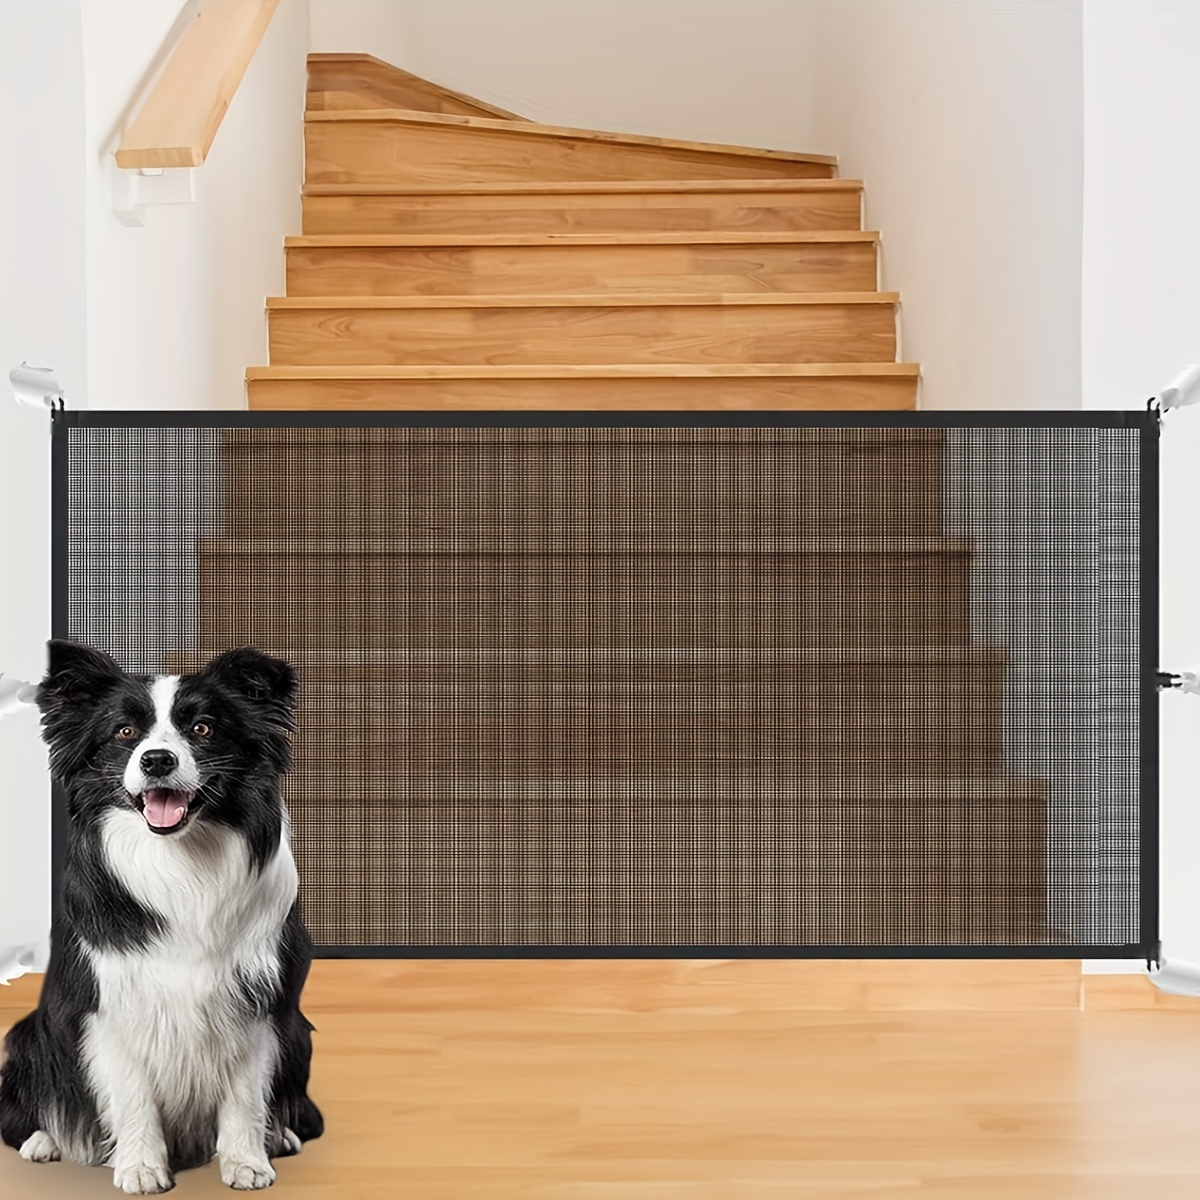 

Easy-install No-drill Pet Safety Fence - Pvc Mesh Barrier For Small Dogs & Cats, Ideal For Balconies & Indoor Use